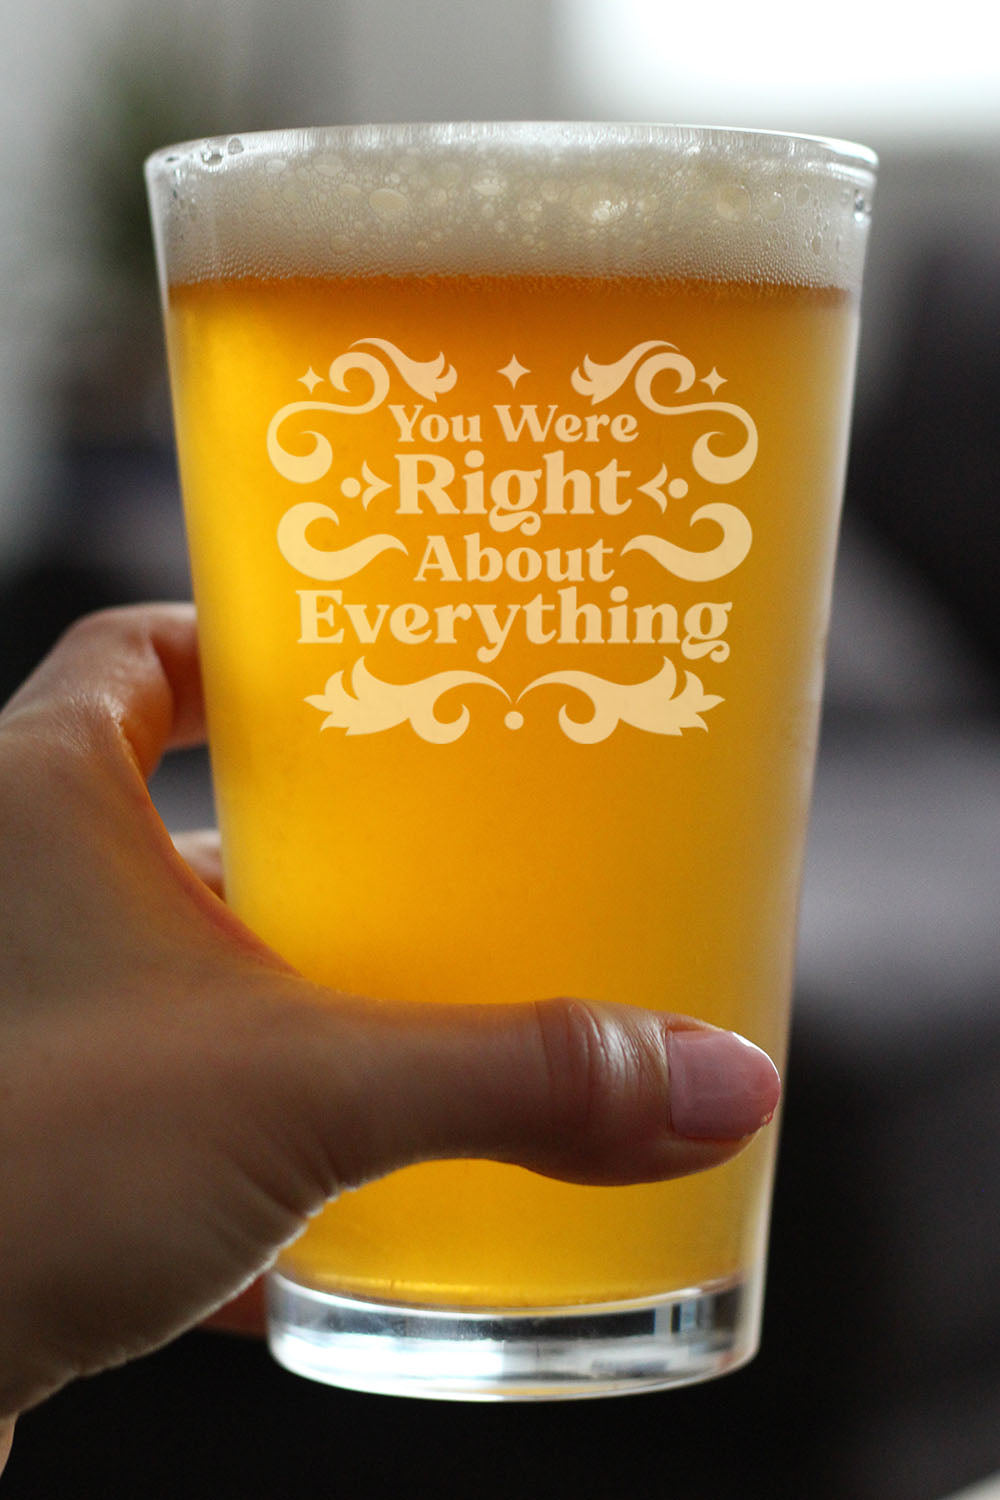 You Were Right About Everything - Funny Pint Glass for Beer - Drinking Birthday Gifts for Mom and Dad - 16 Oz